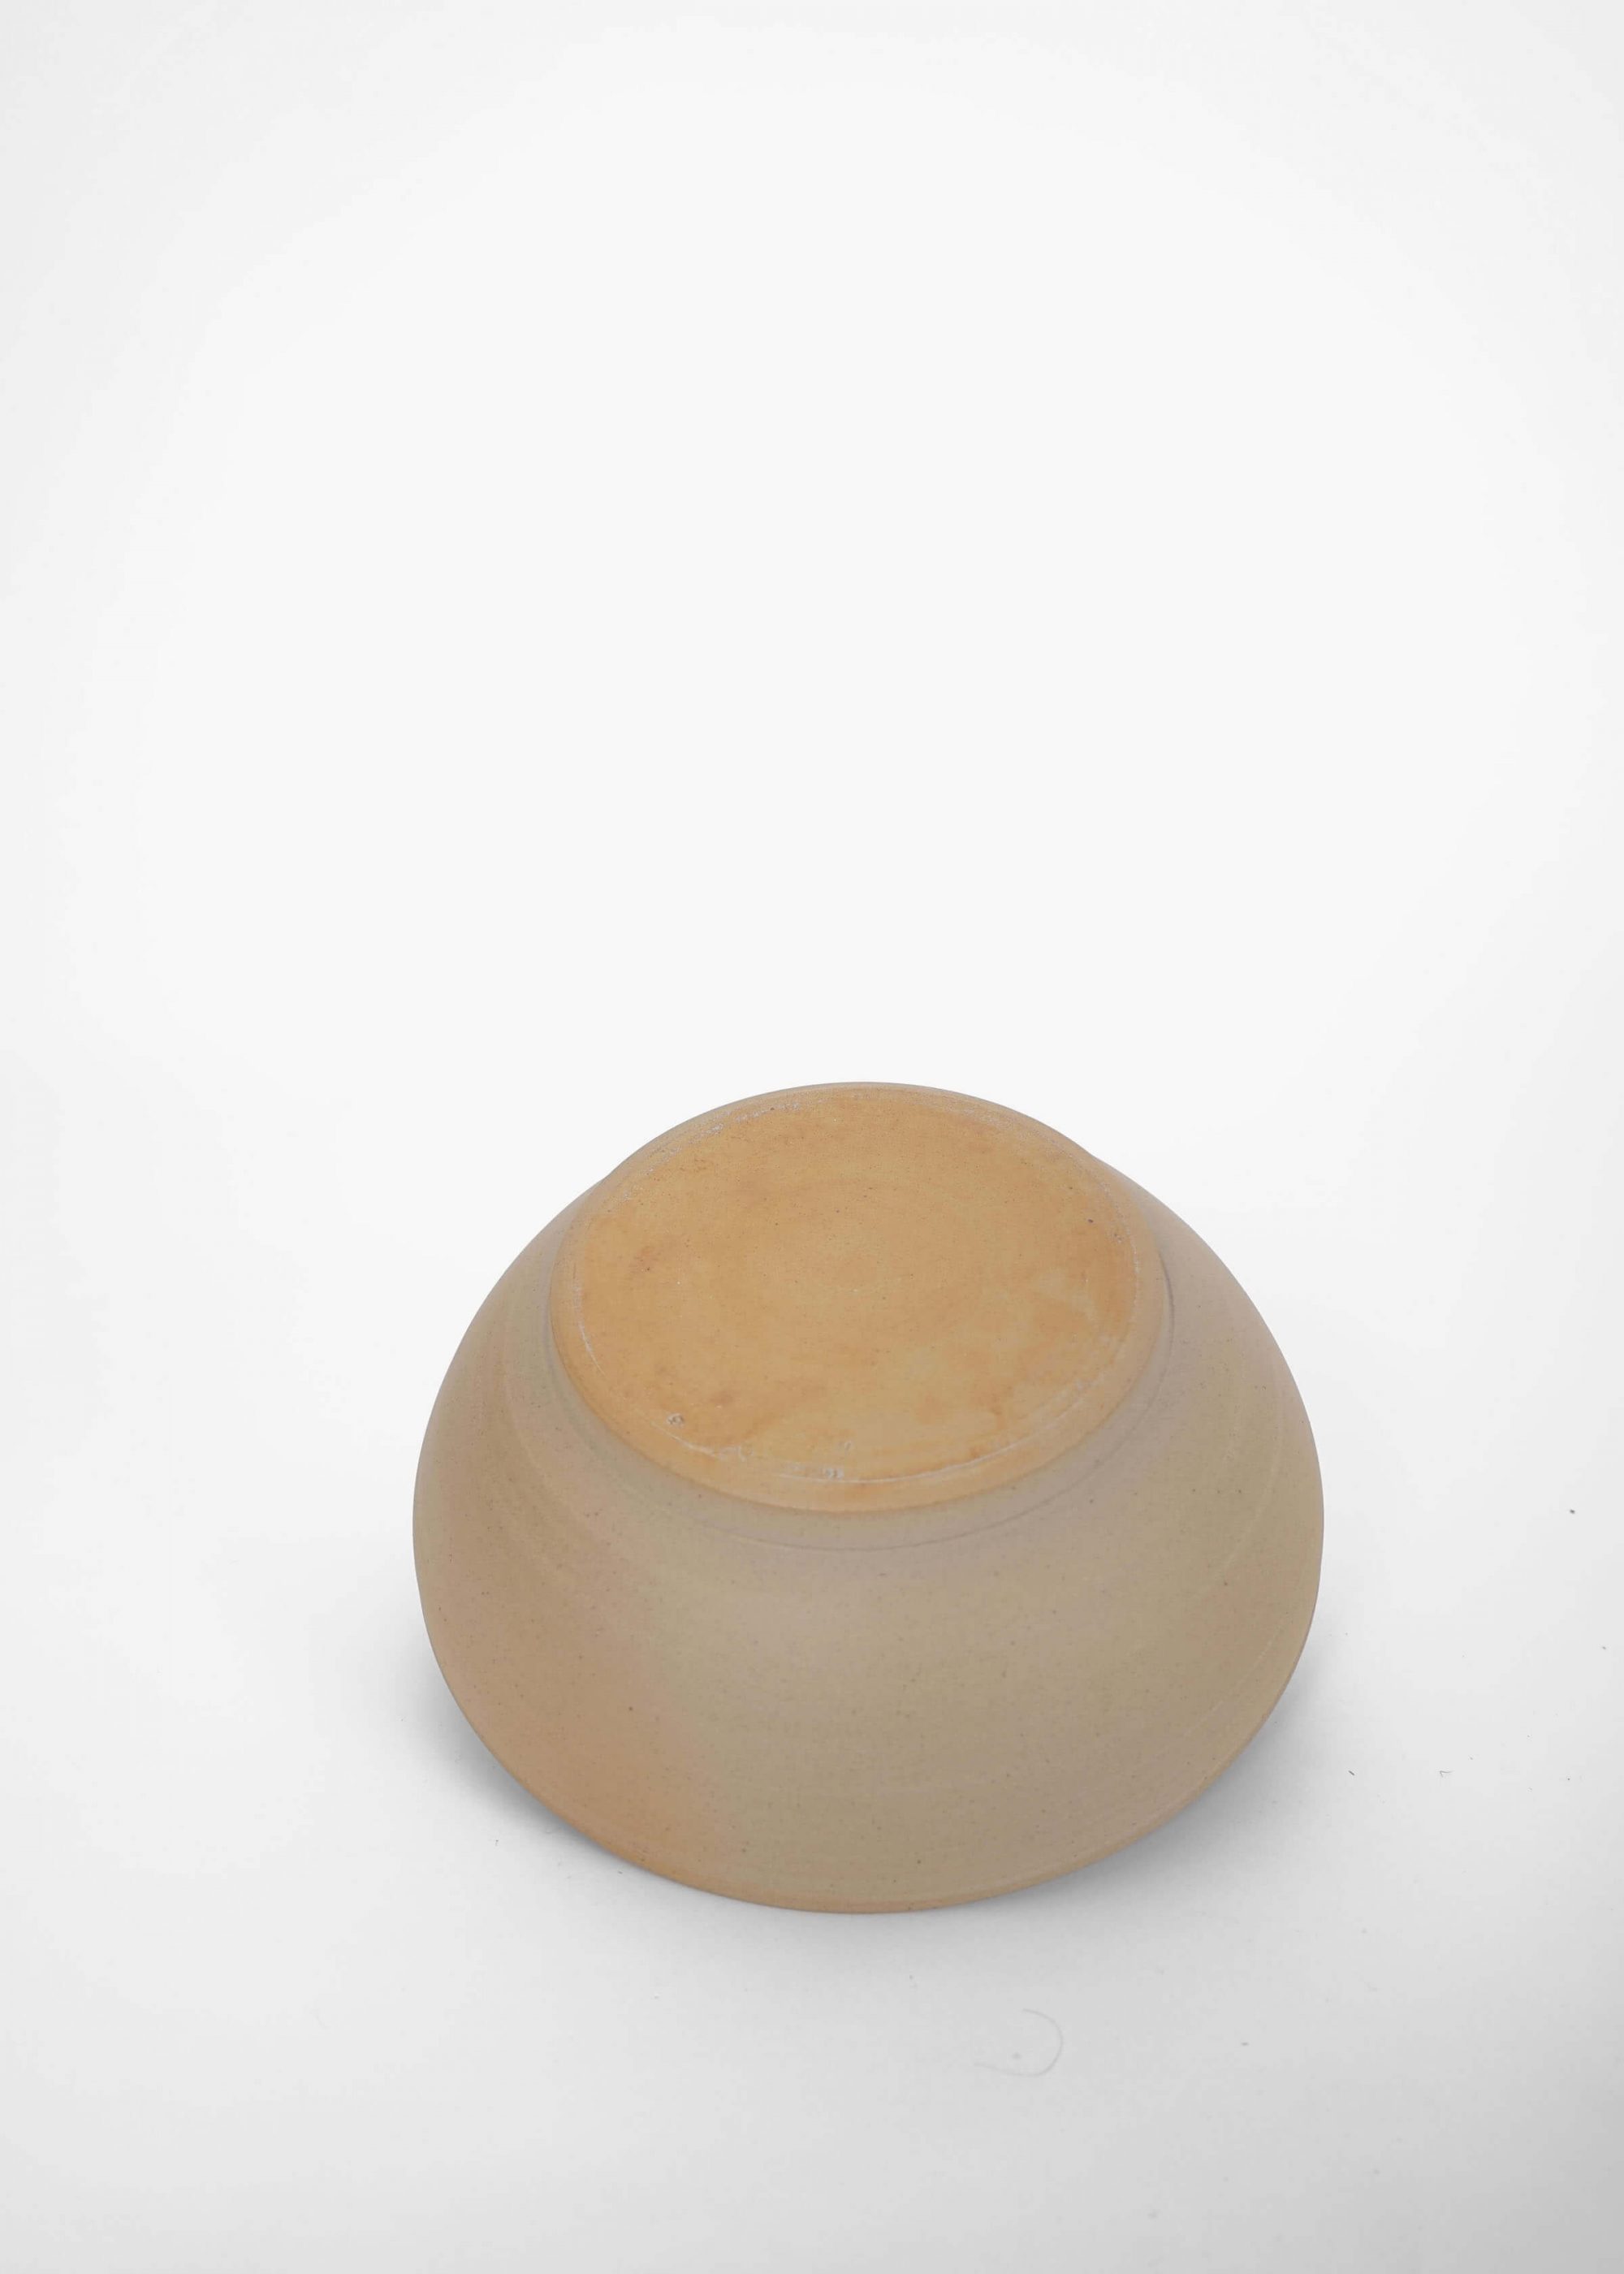 Product image for N° ICSE4 BEUYS Serving Bowl Semi-glazed